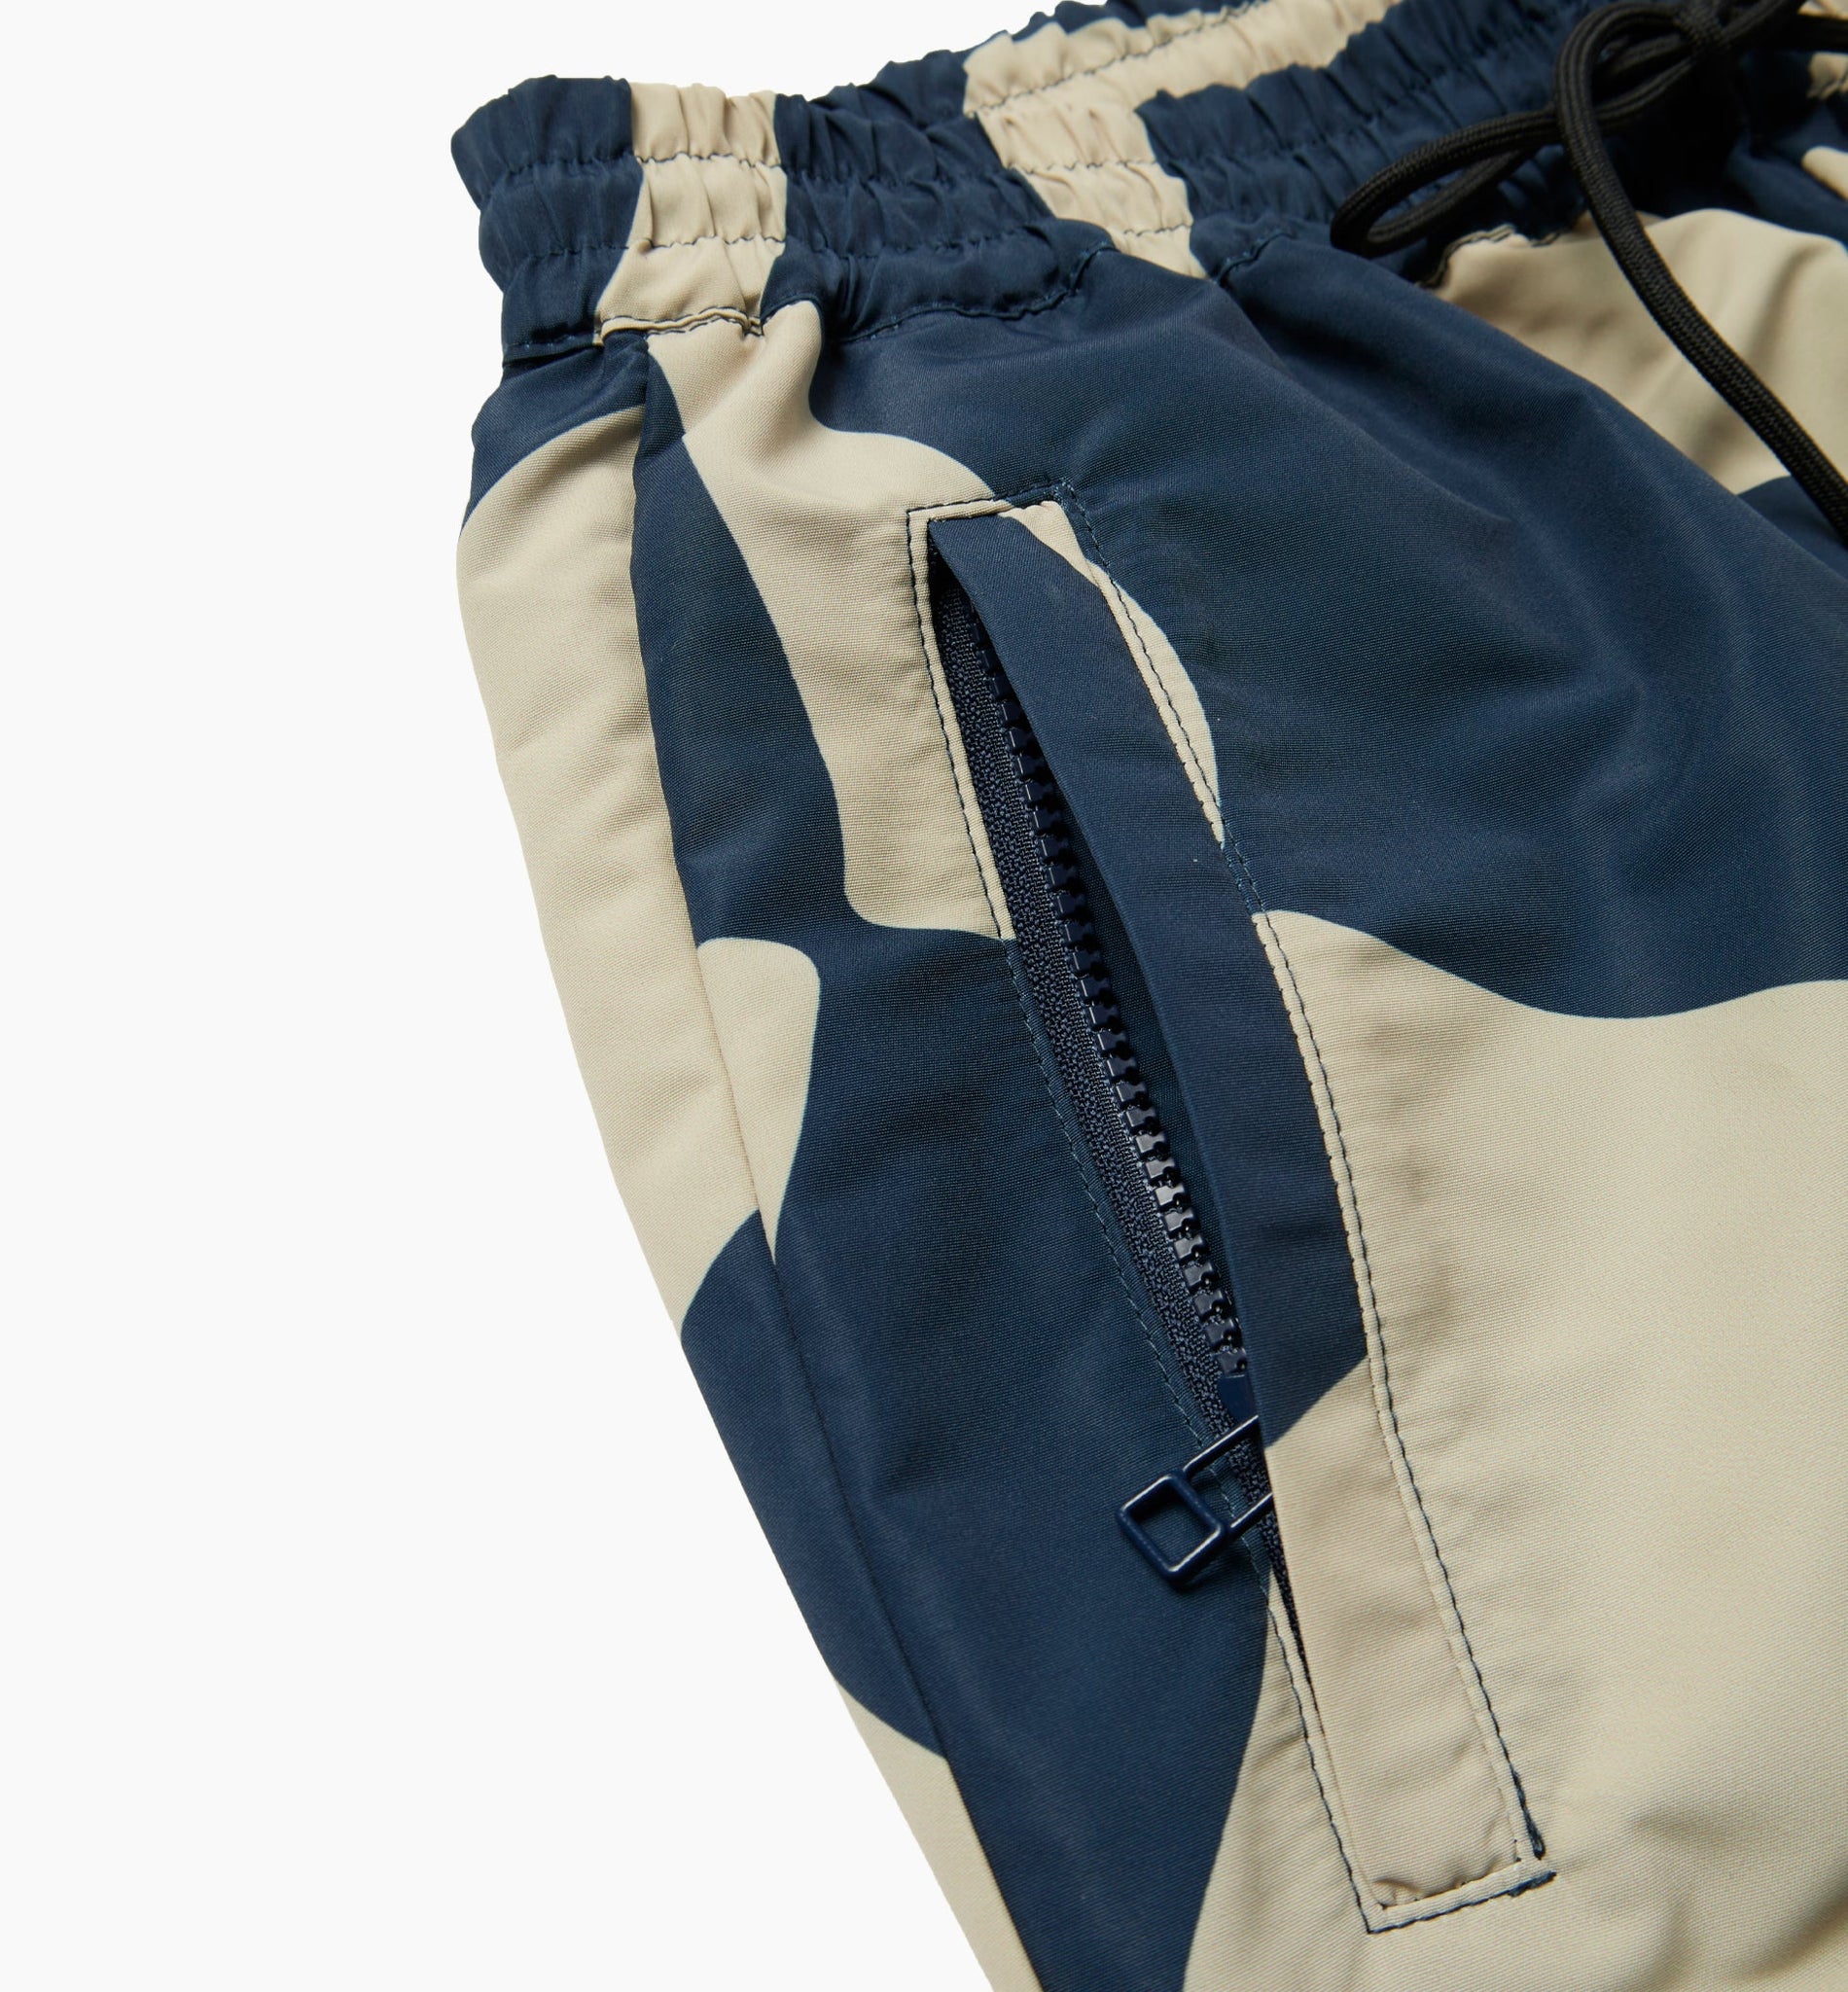 zoom winds track pants